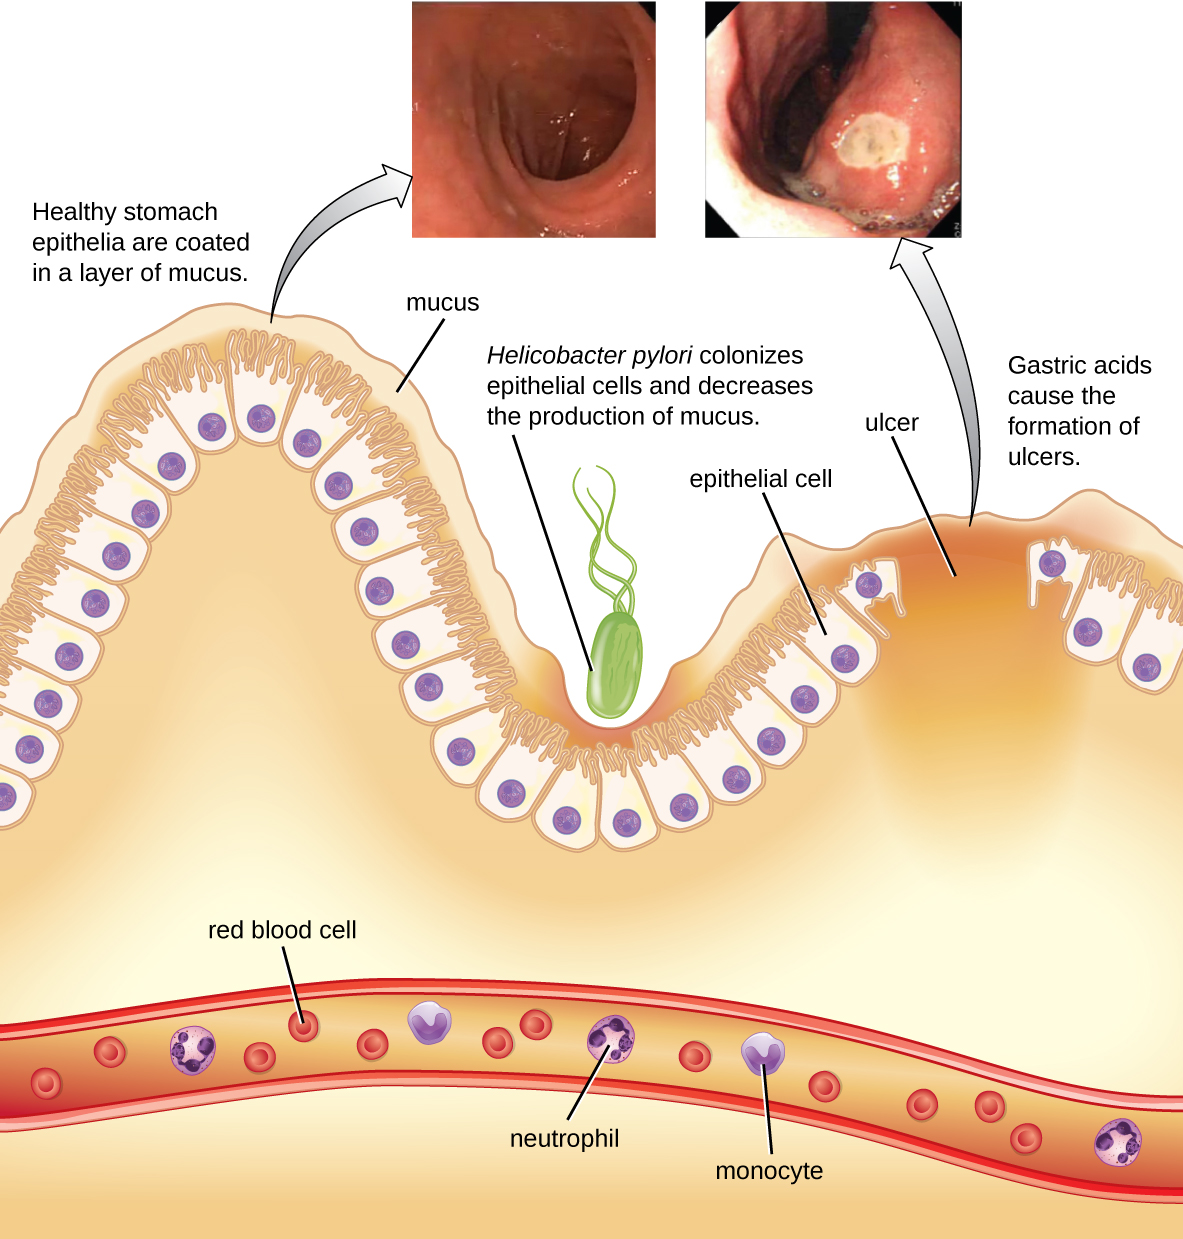 A diagram showing the lining of the stomach. At the very bottom is a blood vessel with red blood cells, neutrophils, and monocytes. At the top is a wavy layer of epithelial cells covered in mucous. Healthy stomach epithelia are coated in a layer of mucous. Helicobacter pylori colonizes epithelial cells and decrease the production of mucus. Gastric acids cause the formation of ulcers. Images of a healthy lining show smooth pink regions, an ulcer is seen as wa white spot in the lining.